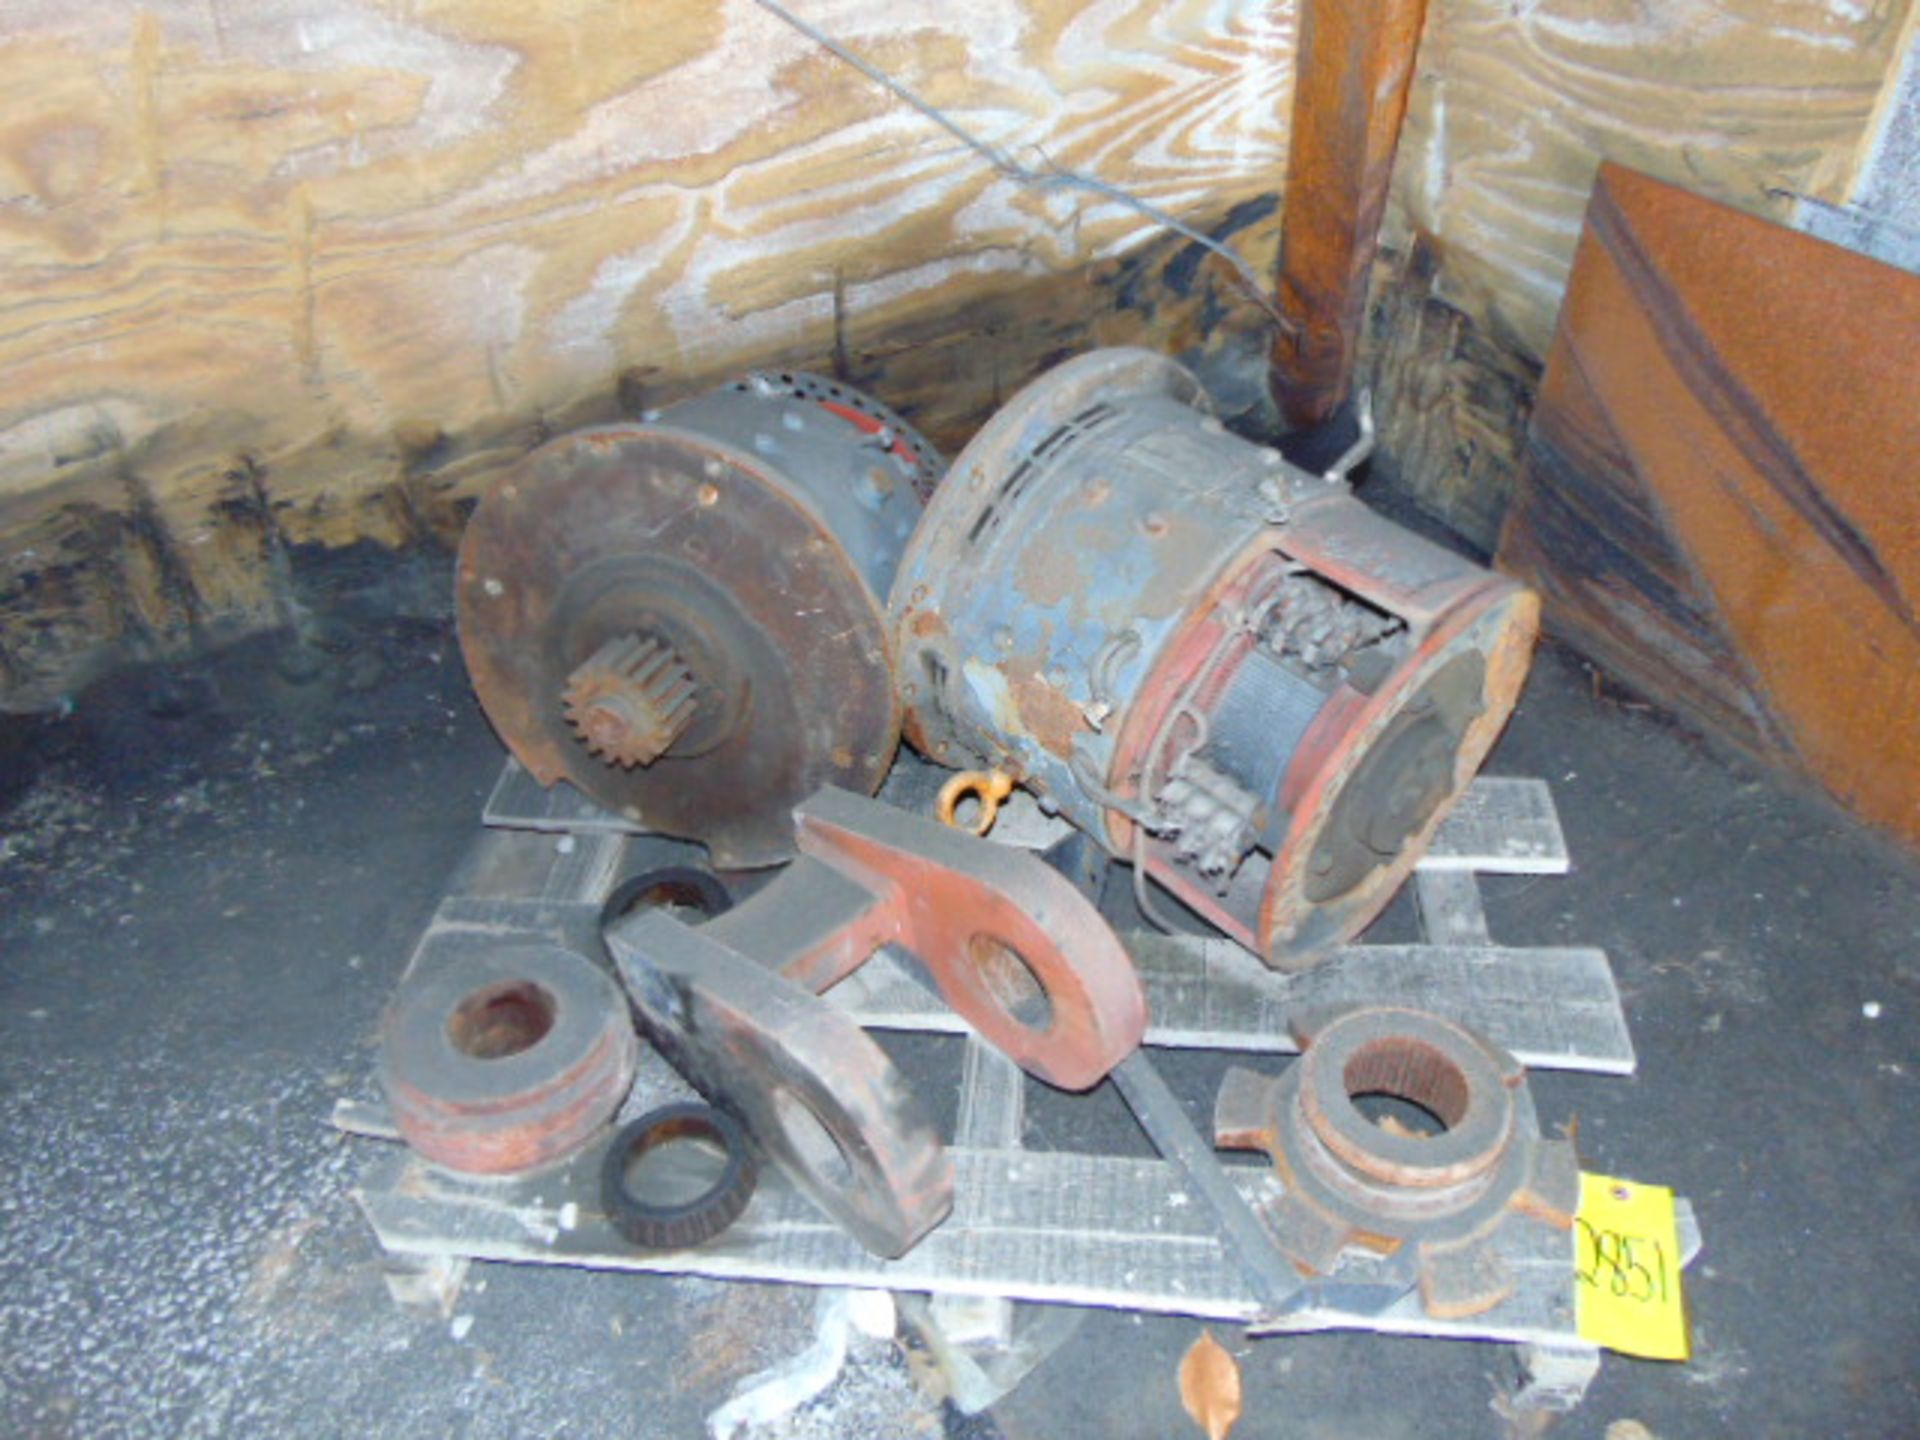 LOT CONSISTING OF: crane parts & misc., assorted (on six skids) - Image 6 of 7